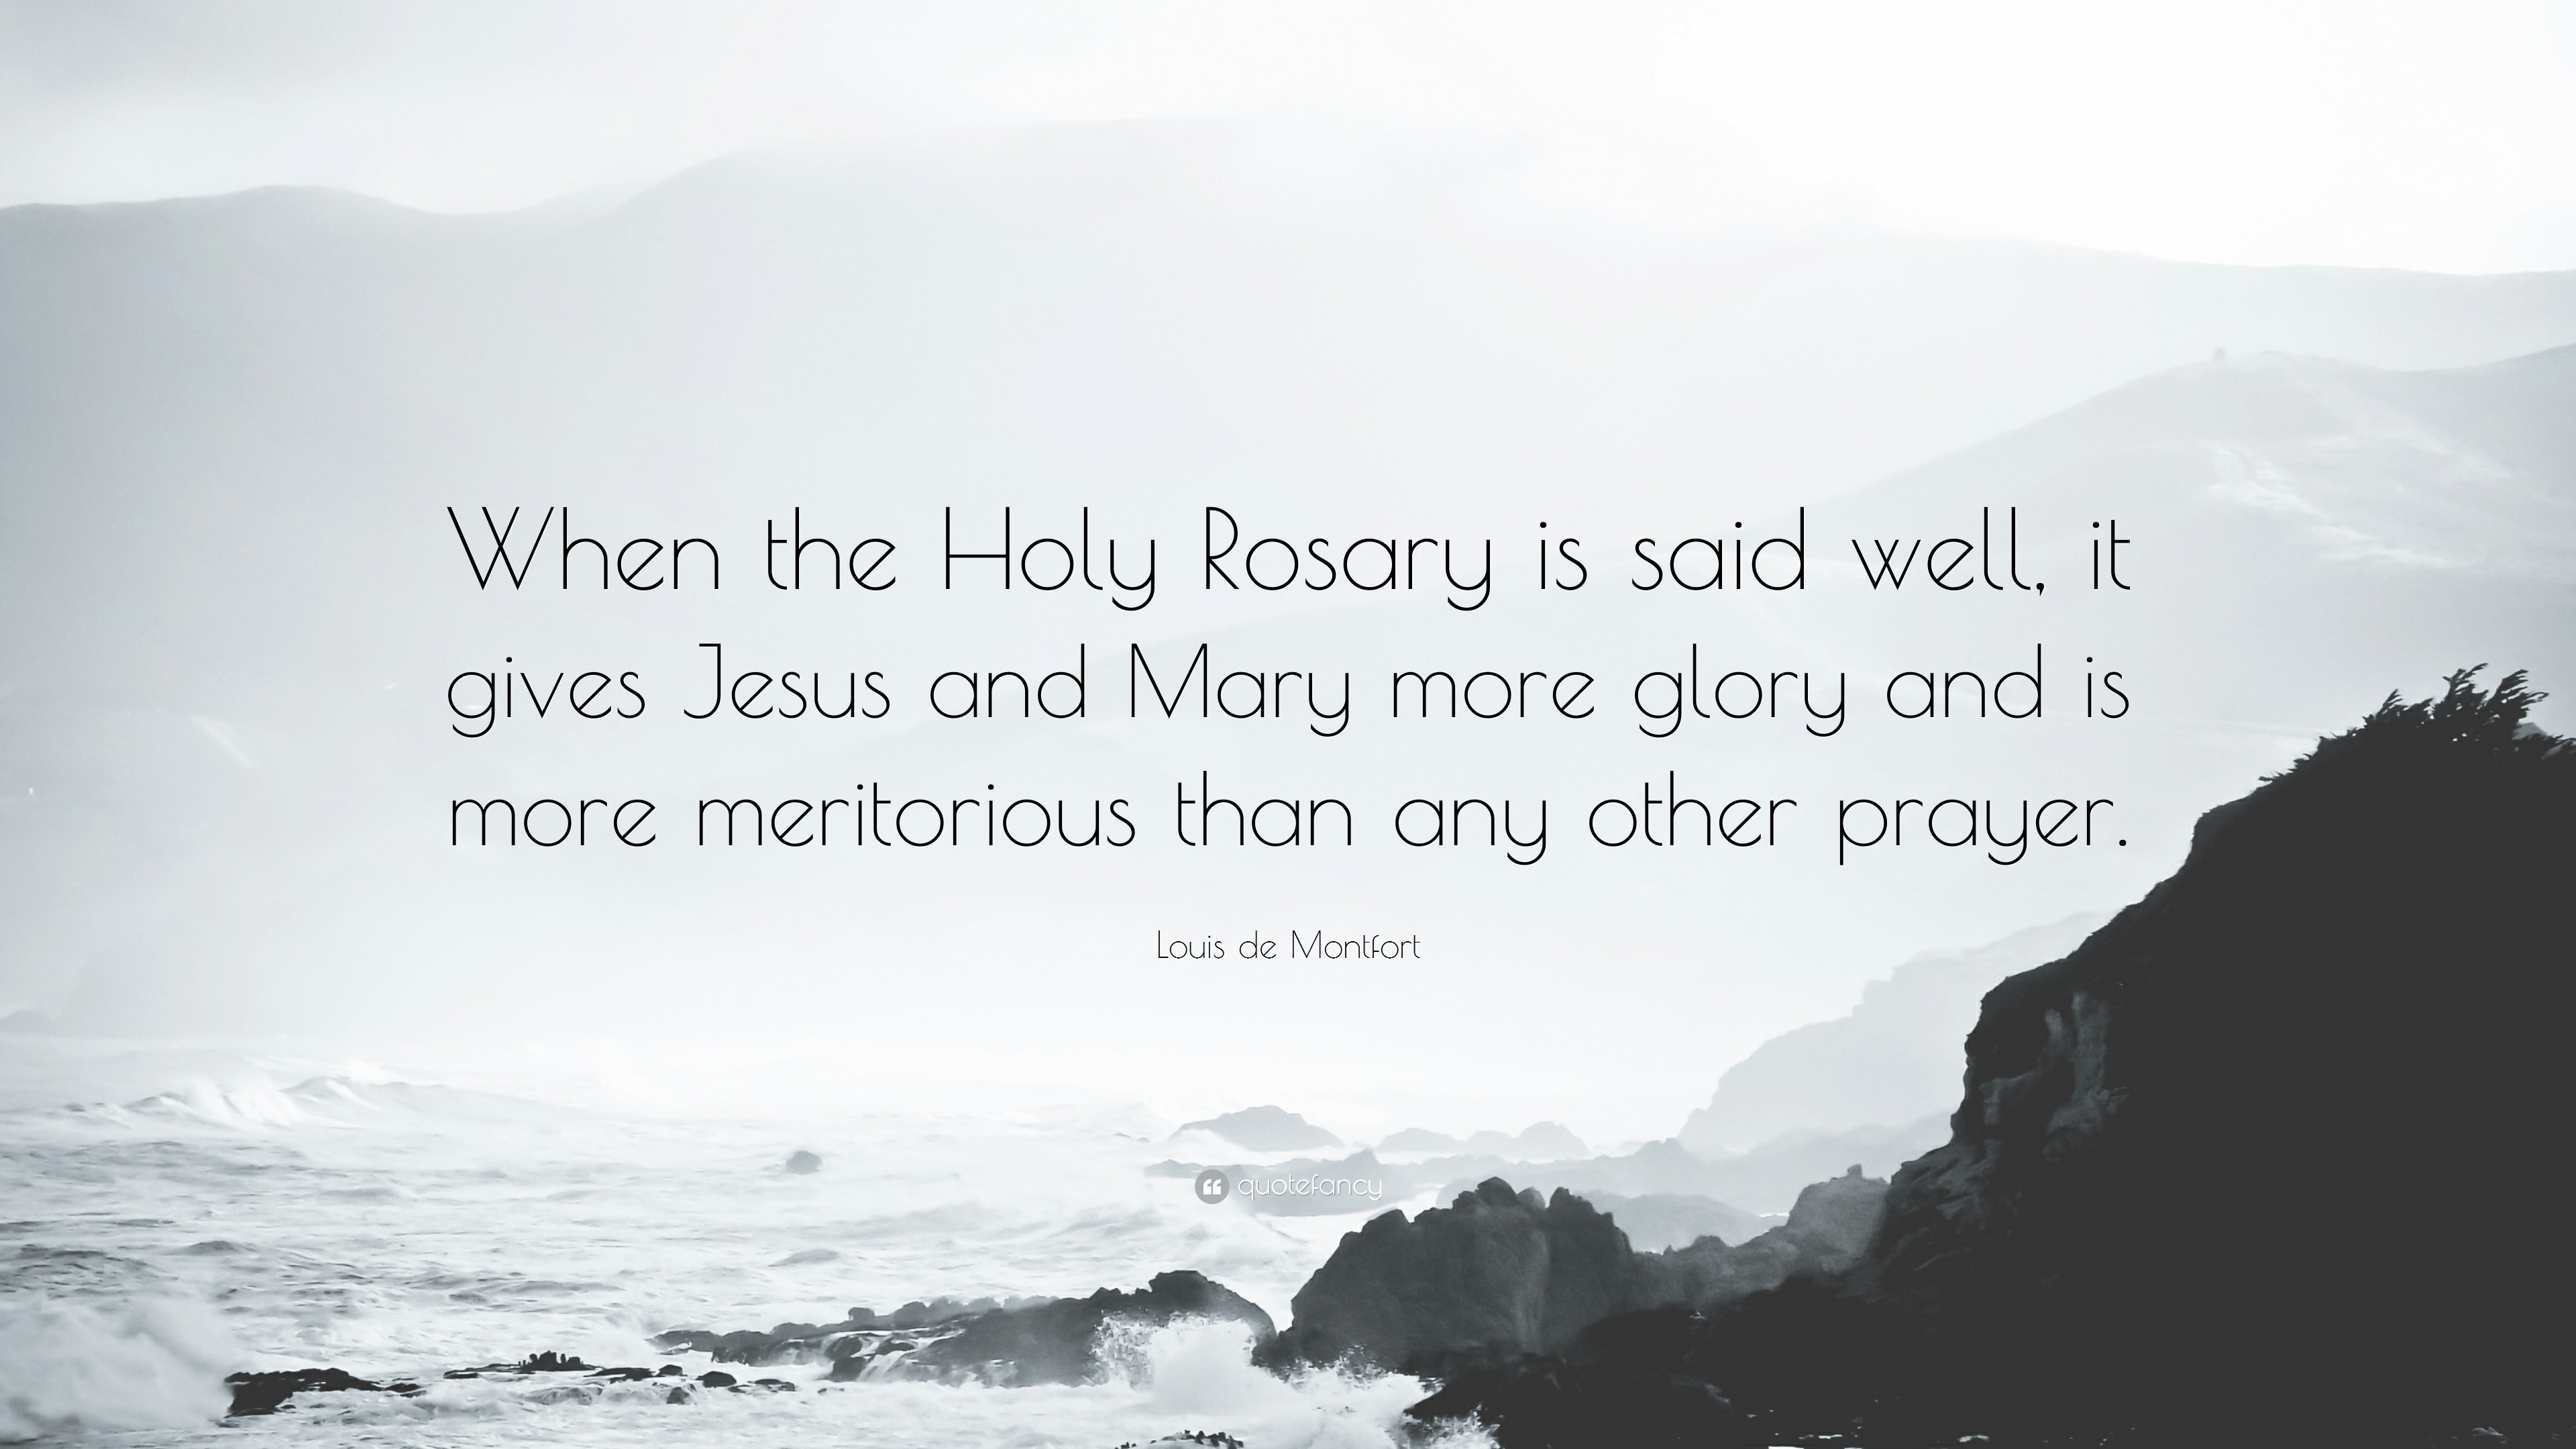 3840x2160 Louis de Montfort Quote: “When the Holy Rosary is said well, it gives